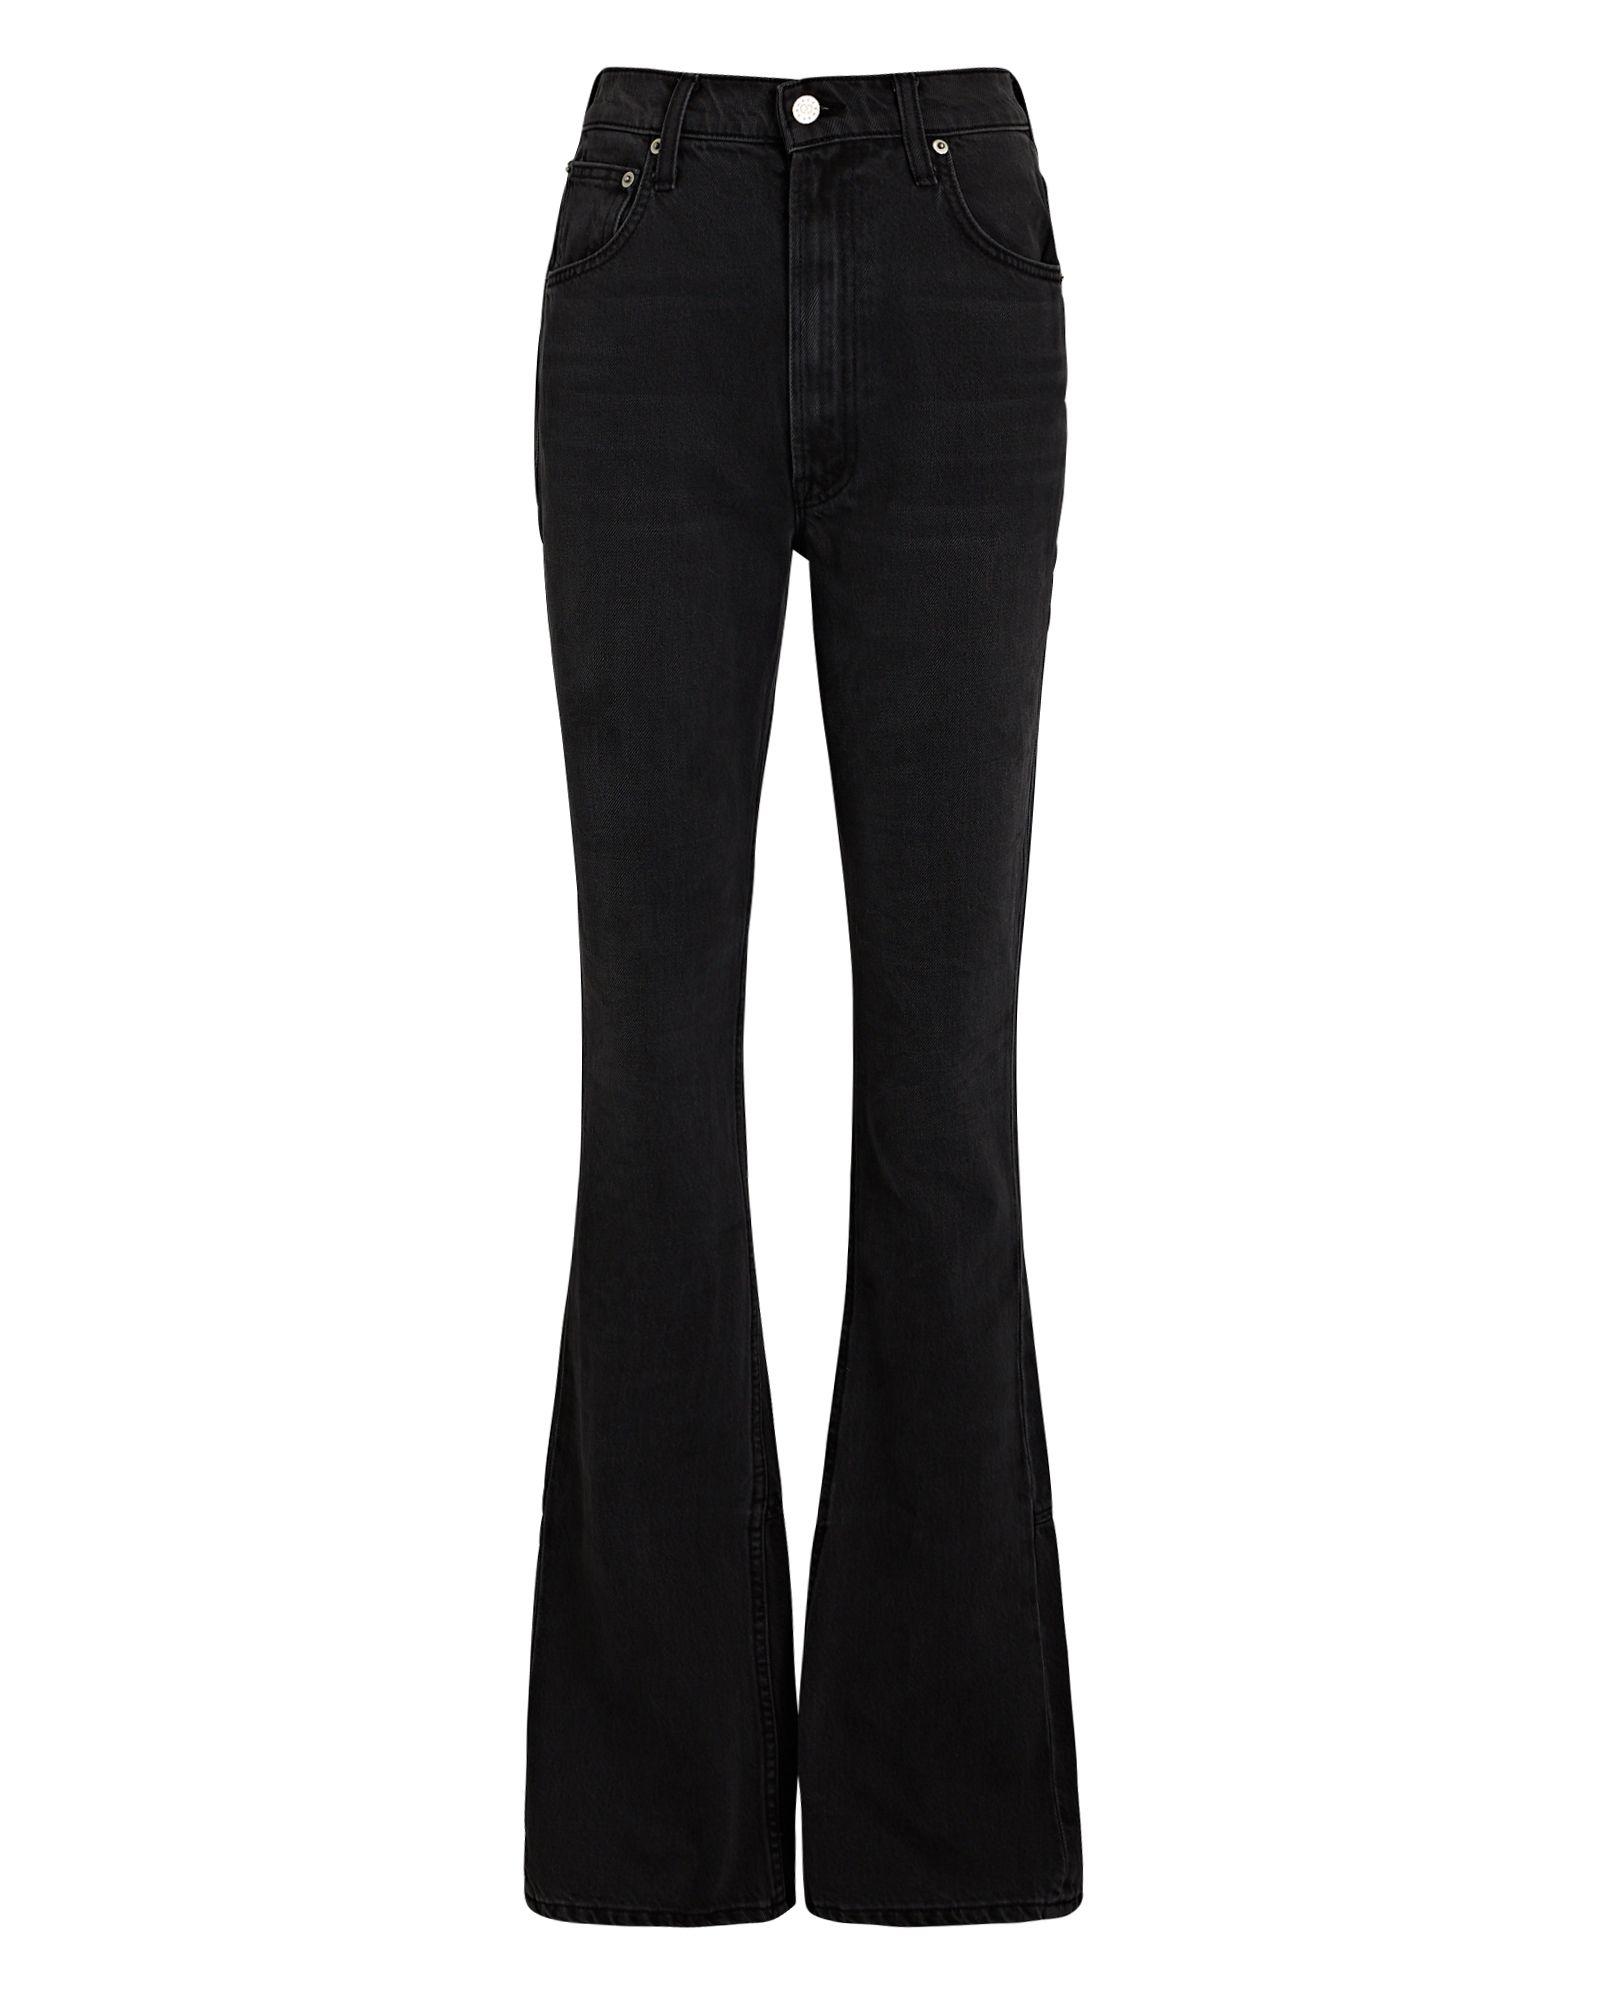 Mother X Snacks! High Waisted Wedge Slit Heel Jeans in Black | Lyst